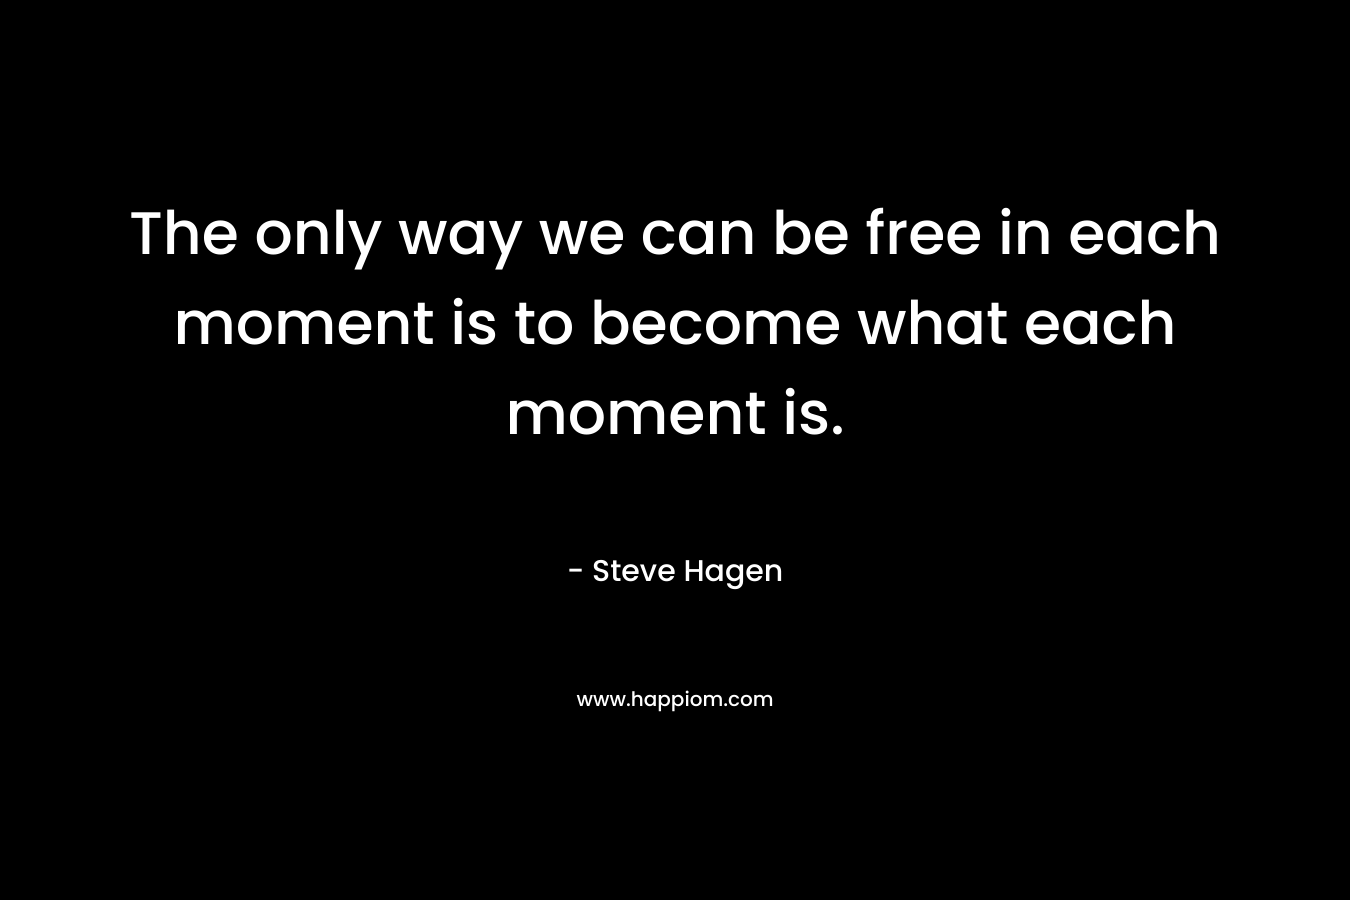 The only way we can be free in each moment is to become what each moment is.